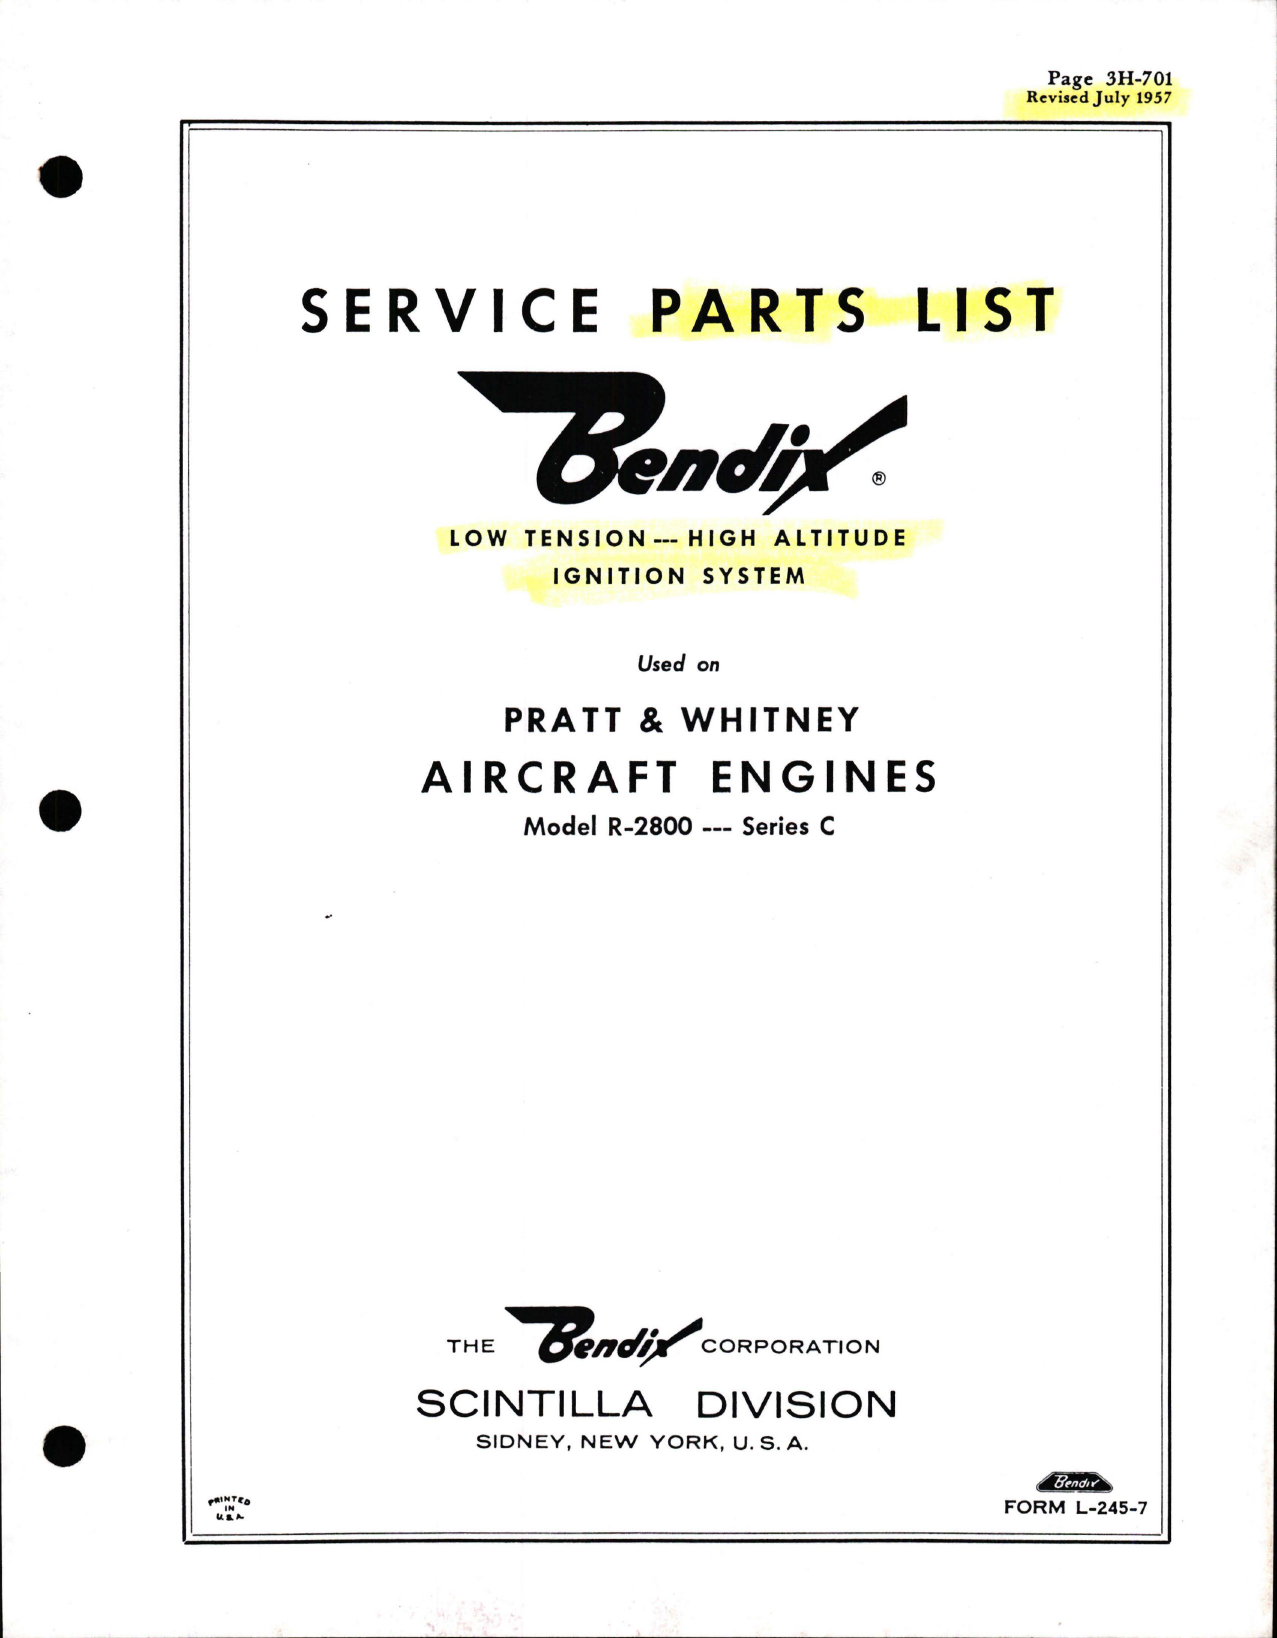 Sample page 1 from AirCorps Library document: Service Parts List for Low Tension - High Altitude Ignition System